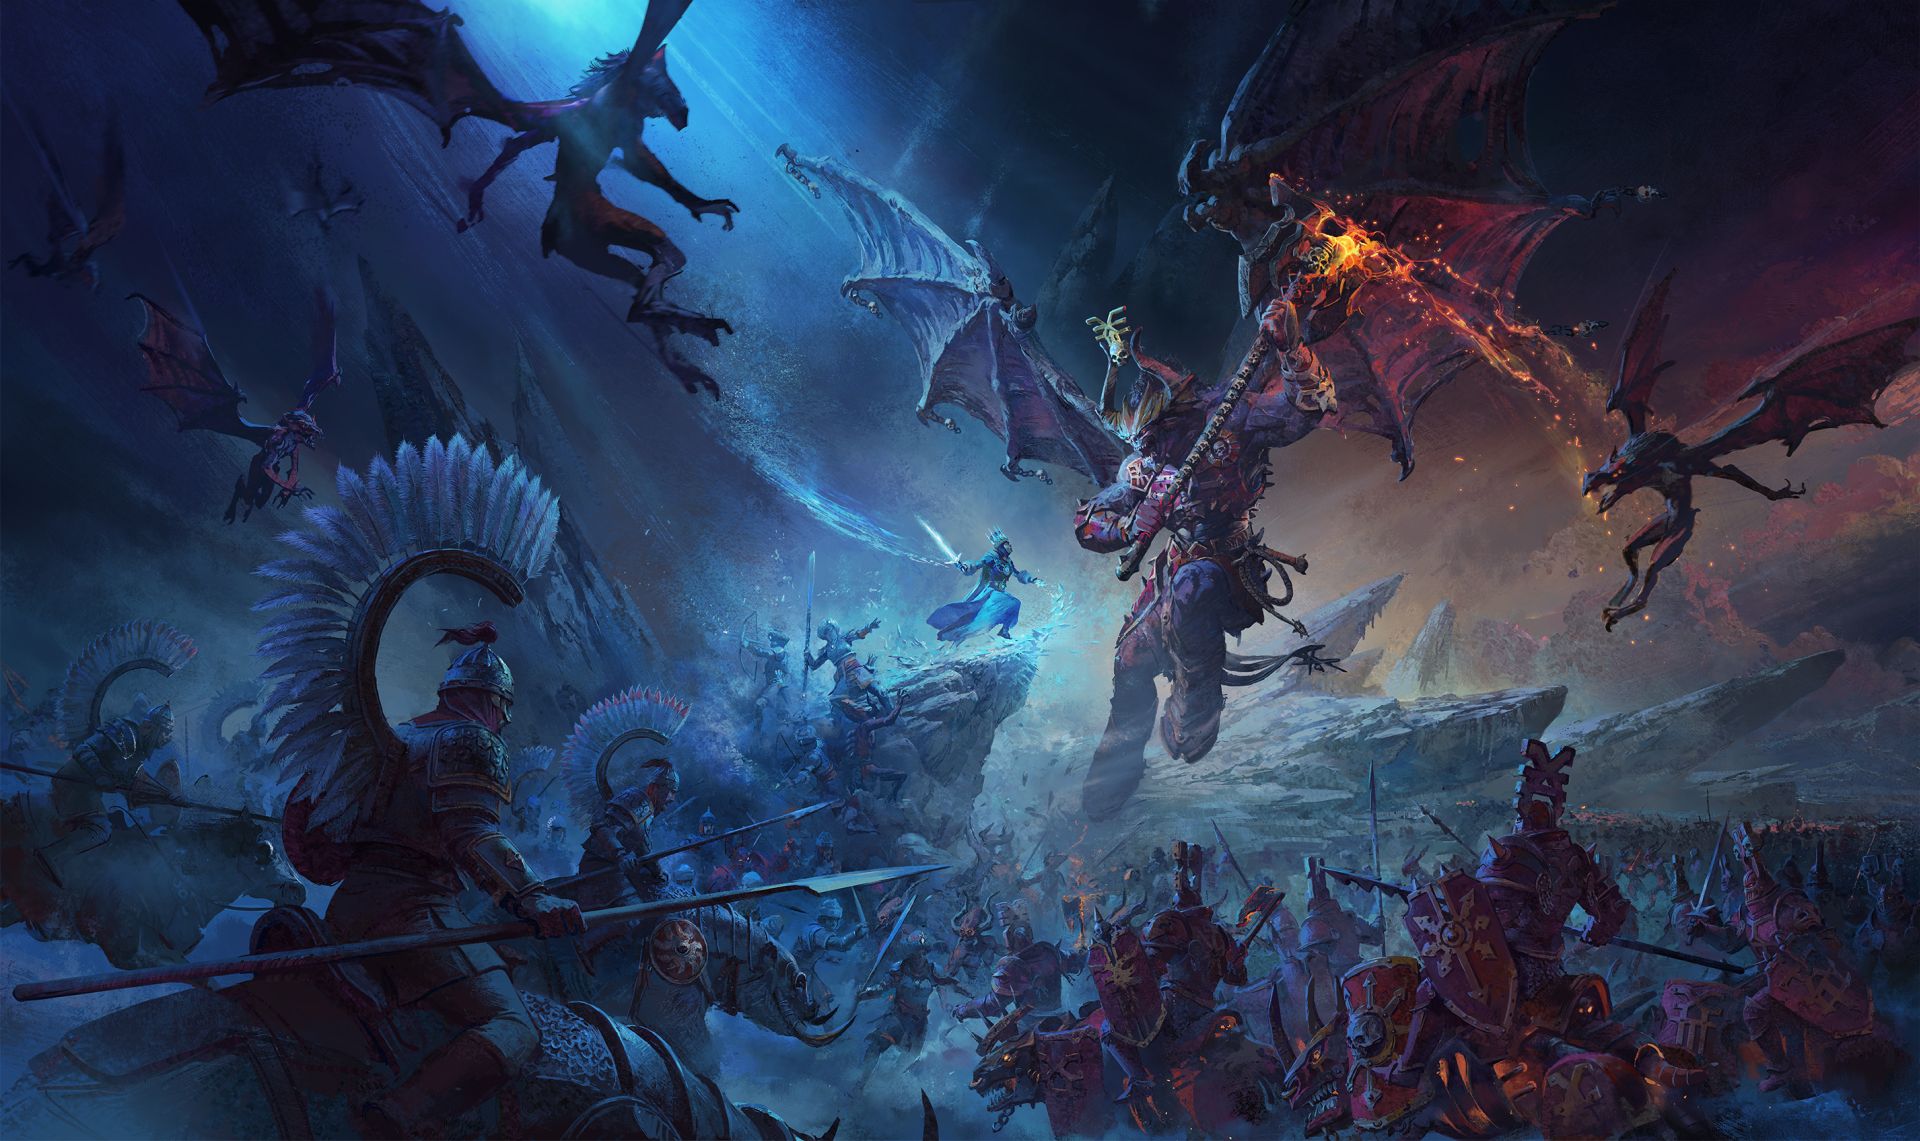 Video: Total War Warhammer 3 – Champions of Chaos